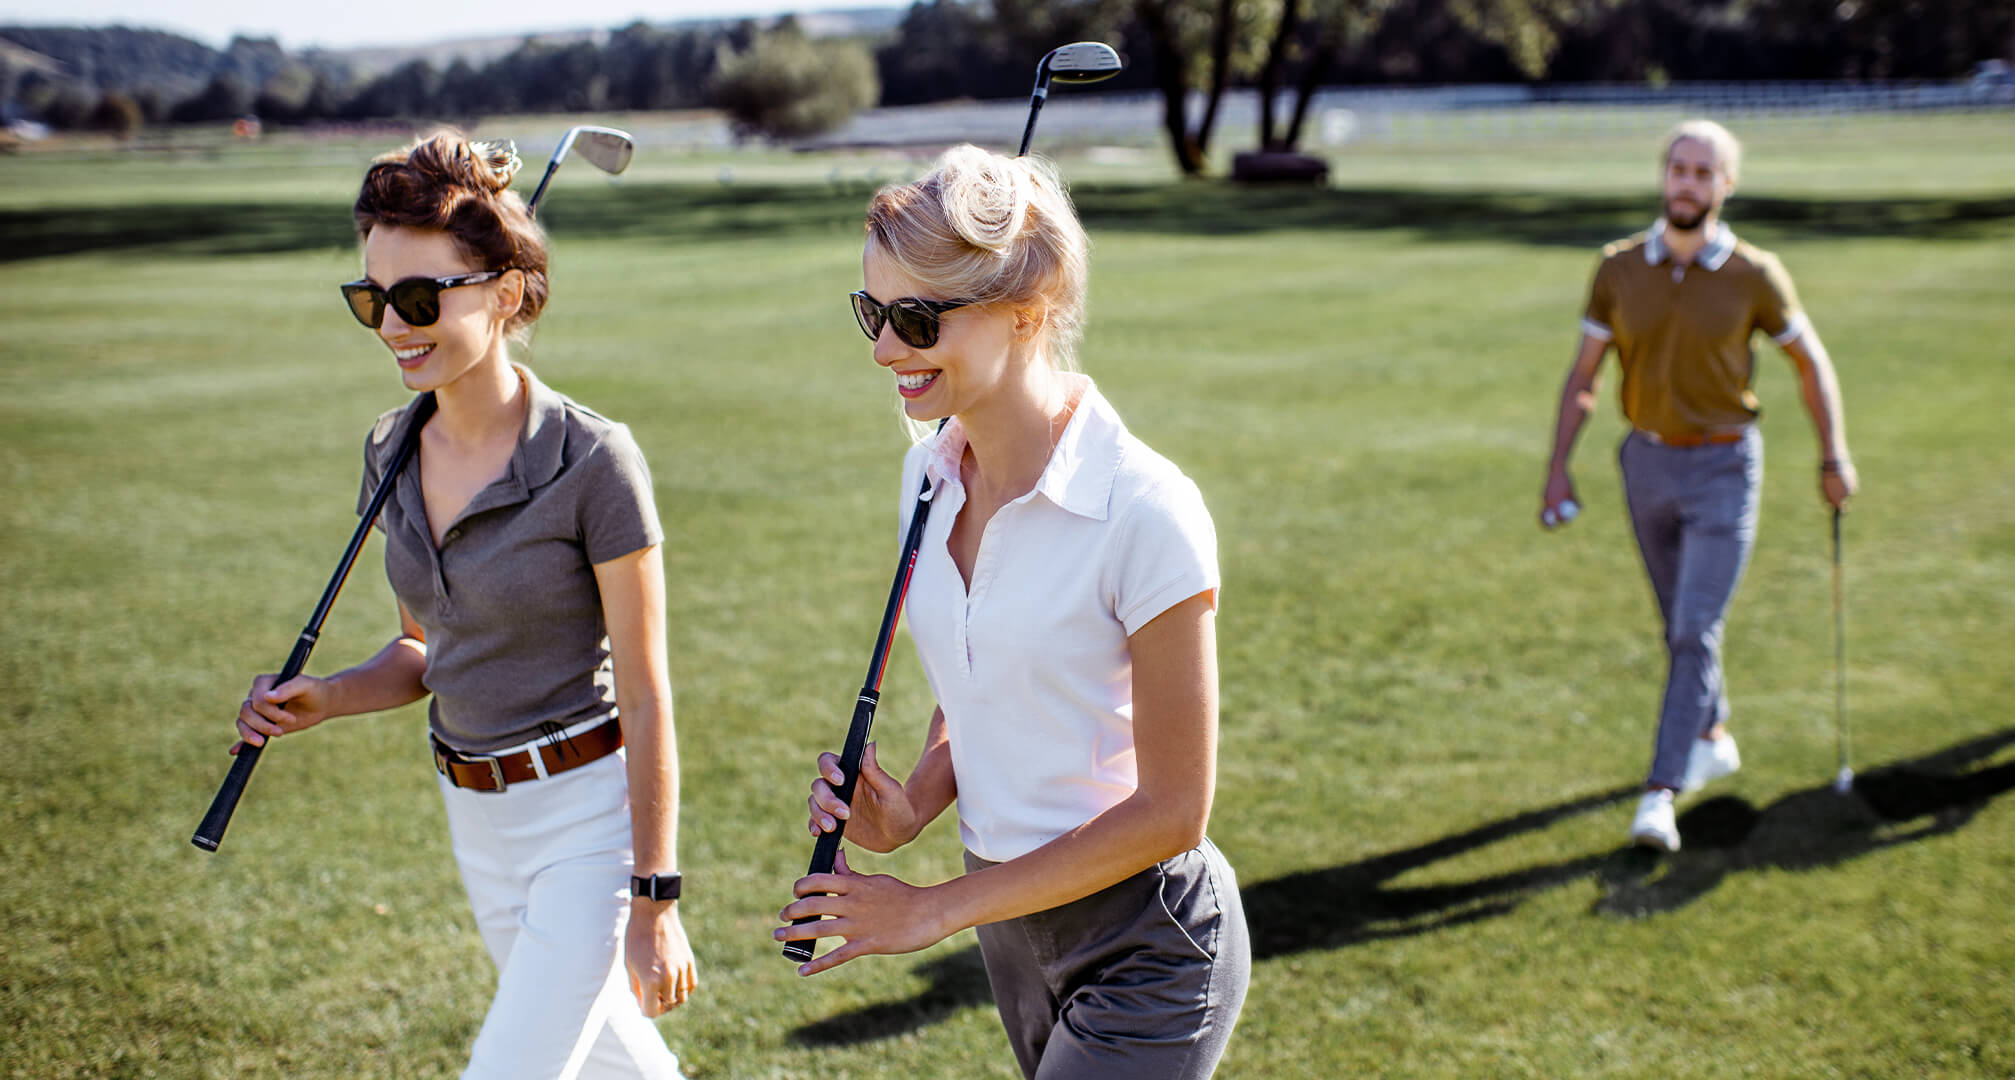 two people golfing with sunglasses